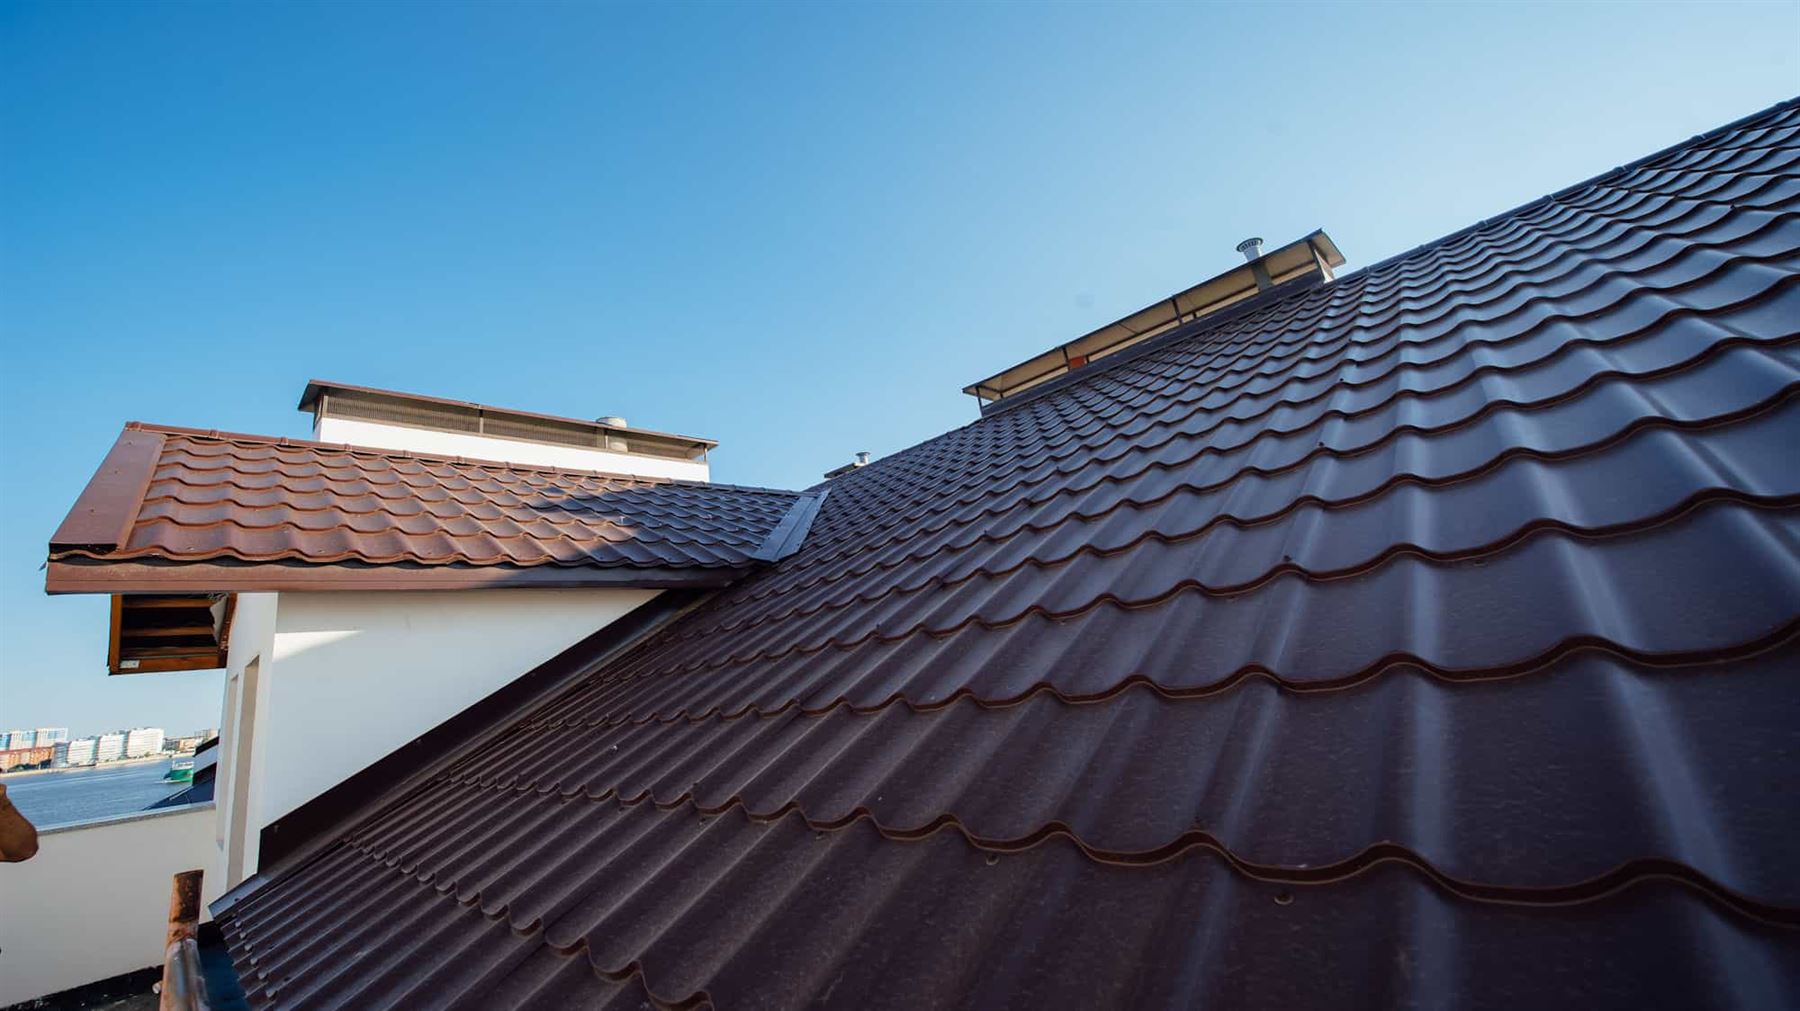 Holliers Specialty Roofing